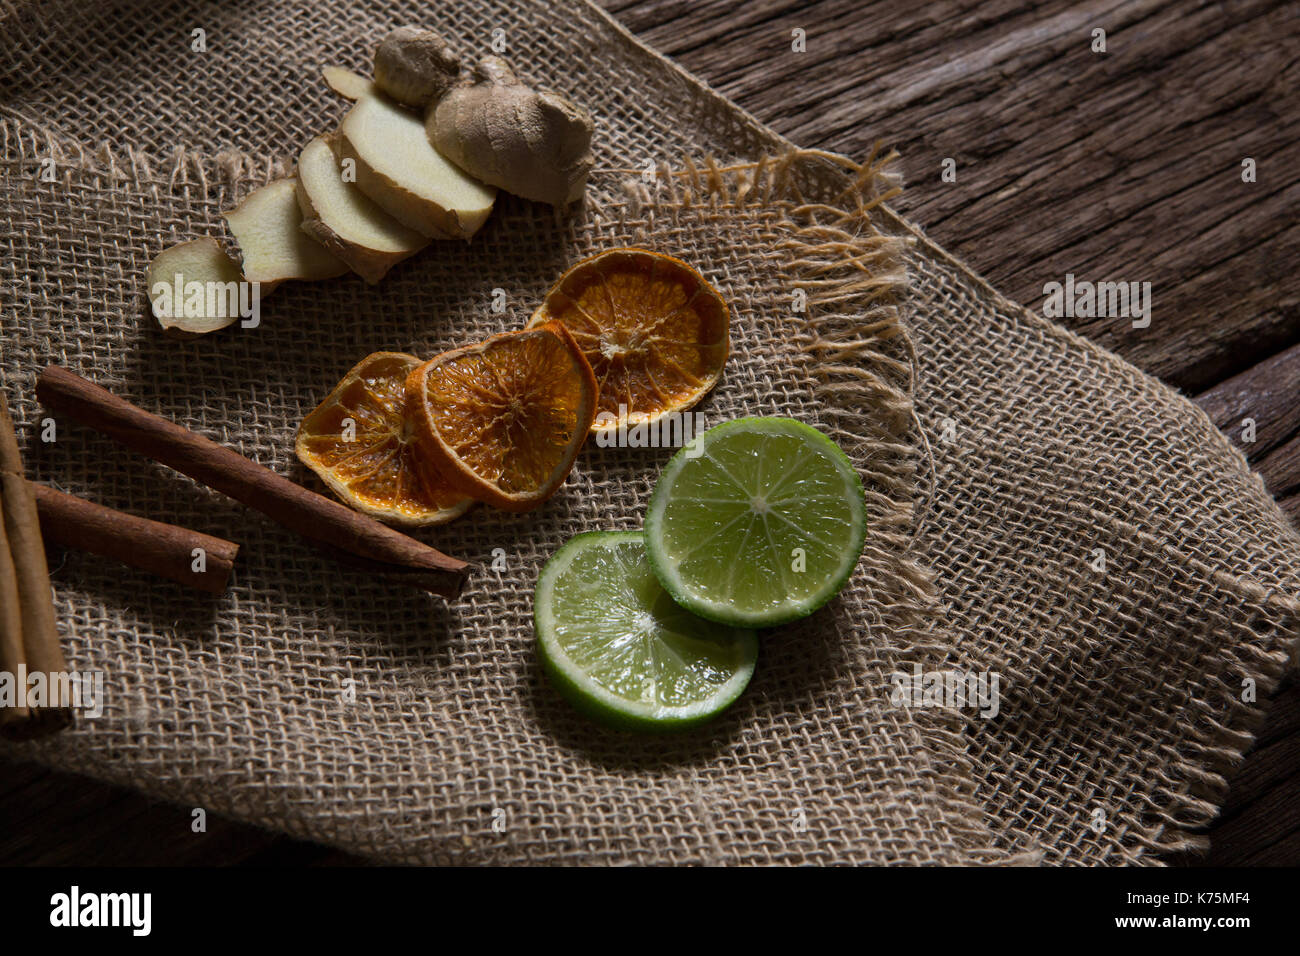 Close-up of sliced ginger, dried orange and lemon with cinnamon stick on textile Stock Photo